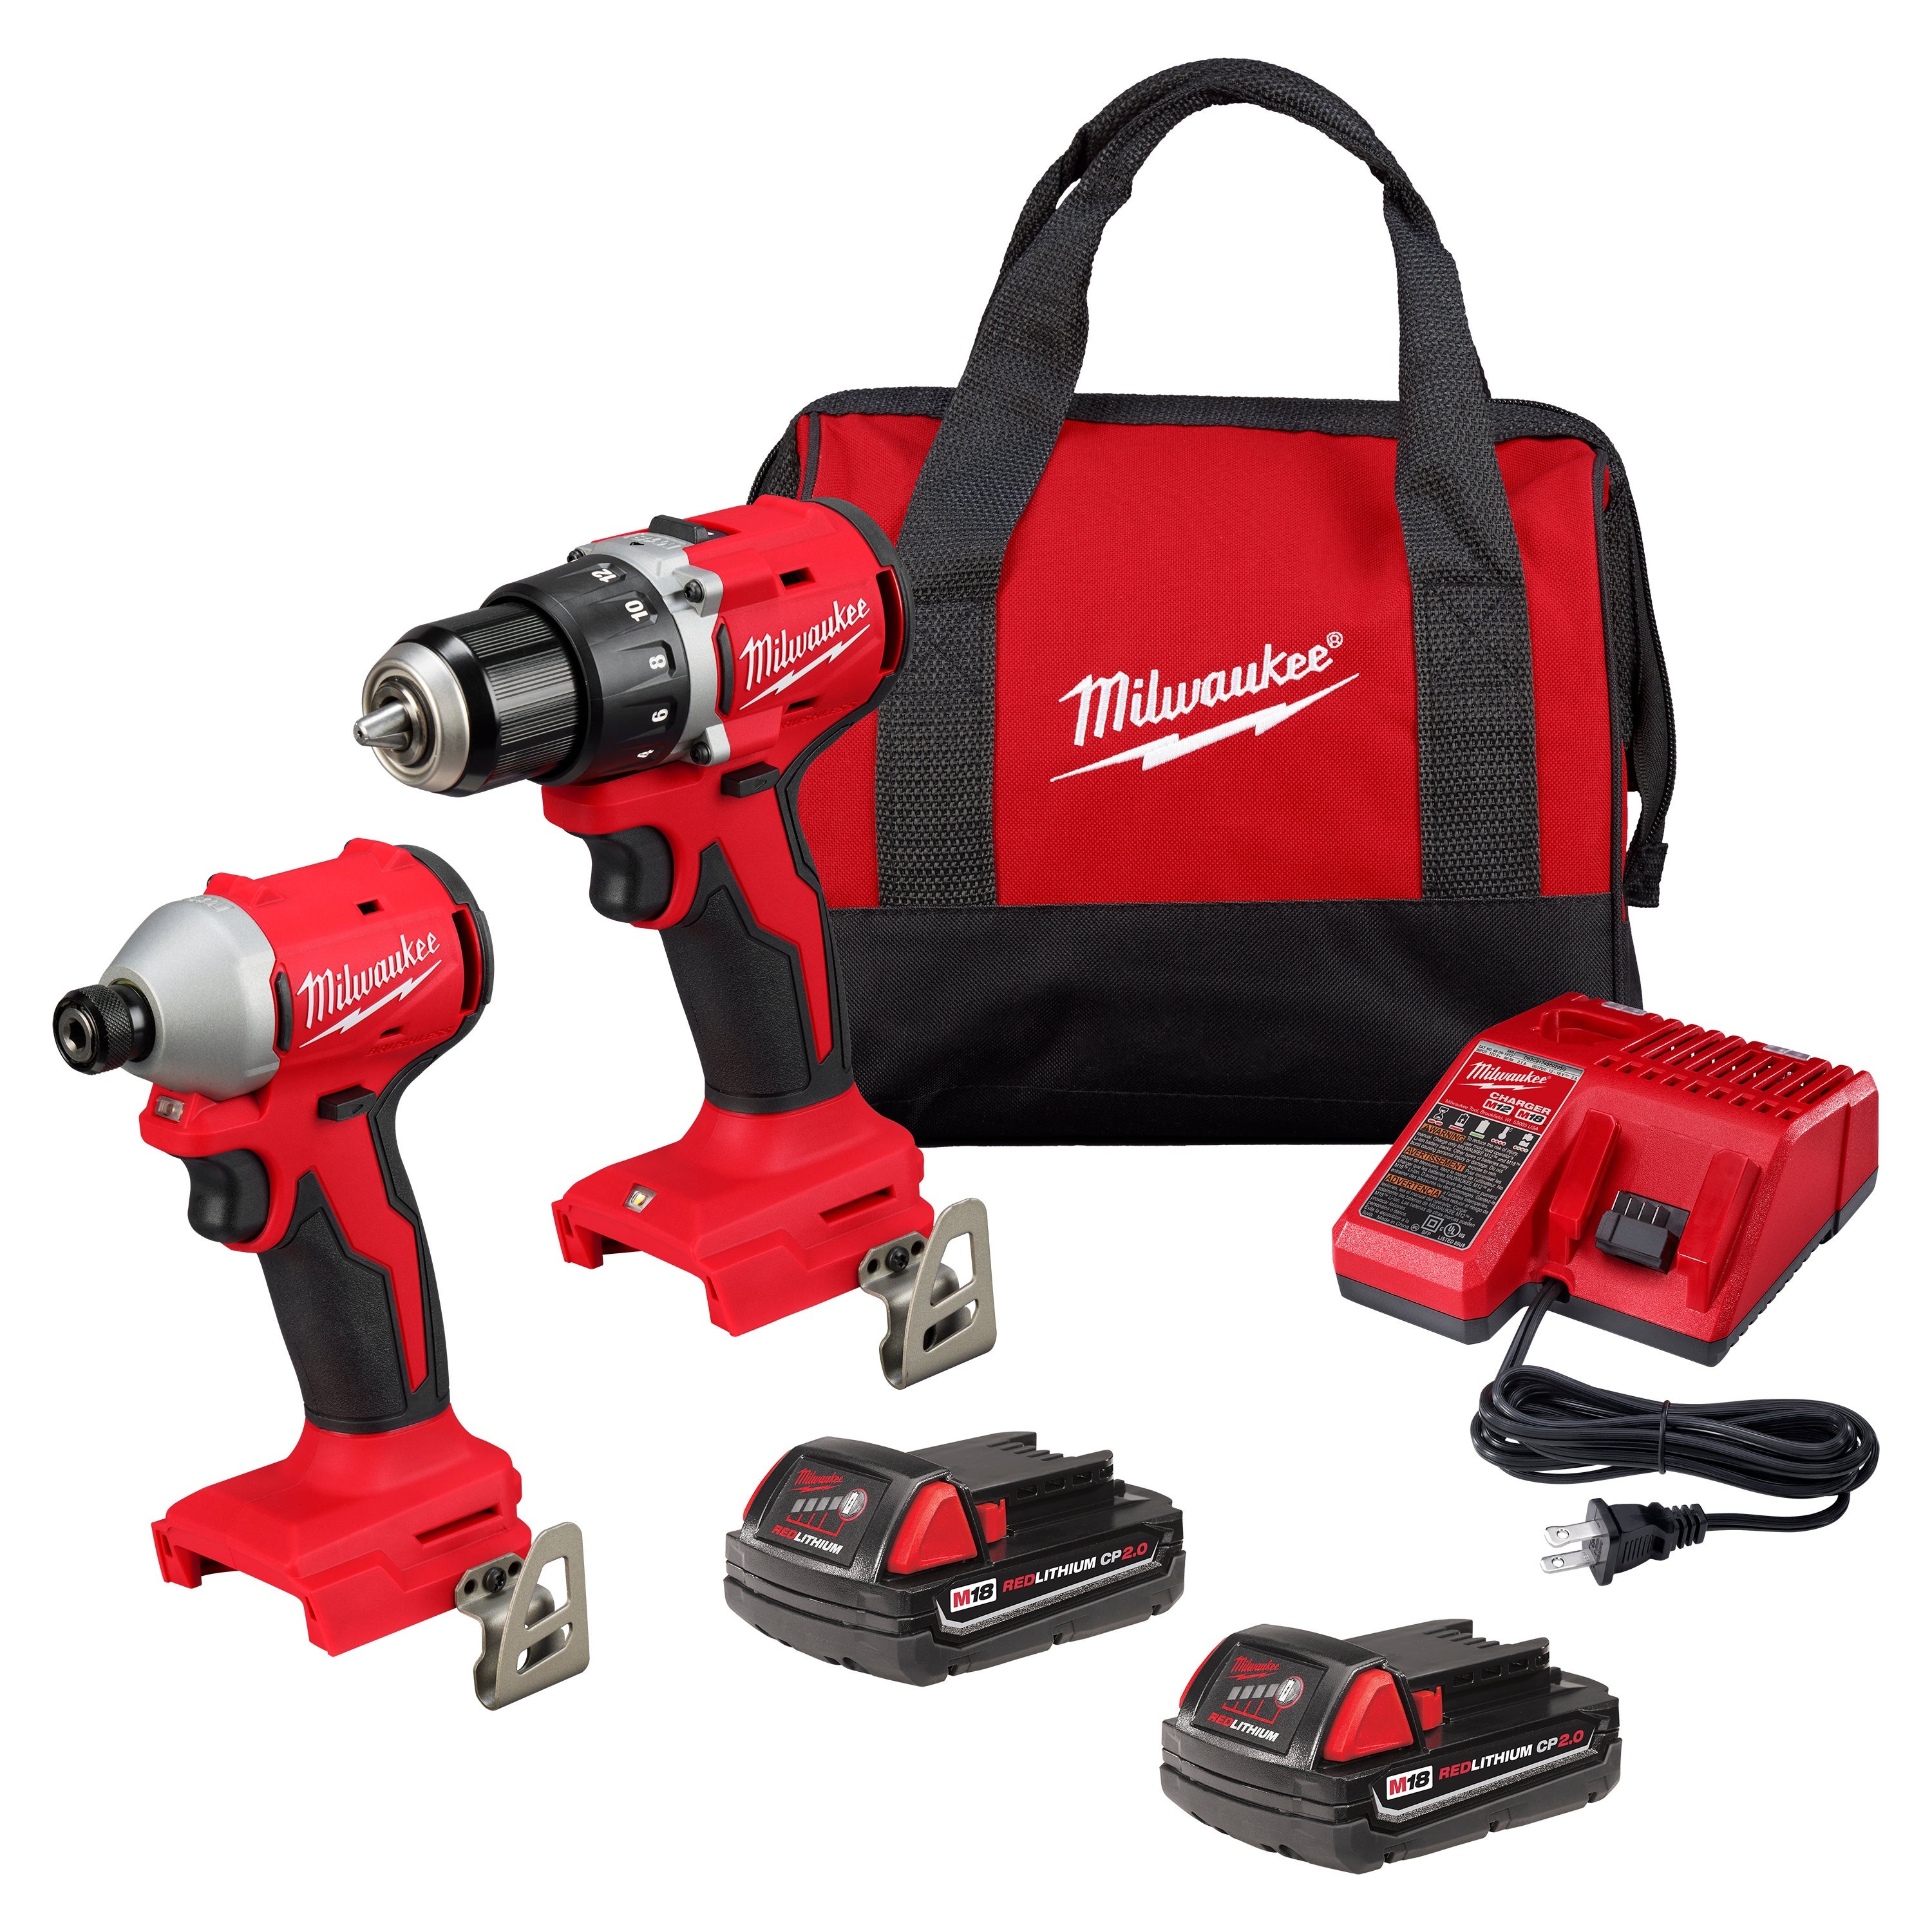 M18 Compact Brushless 2-Tool Combo Kit - Drill/Driver & Hex Impact Driver